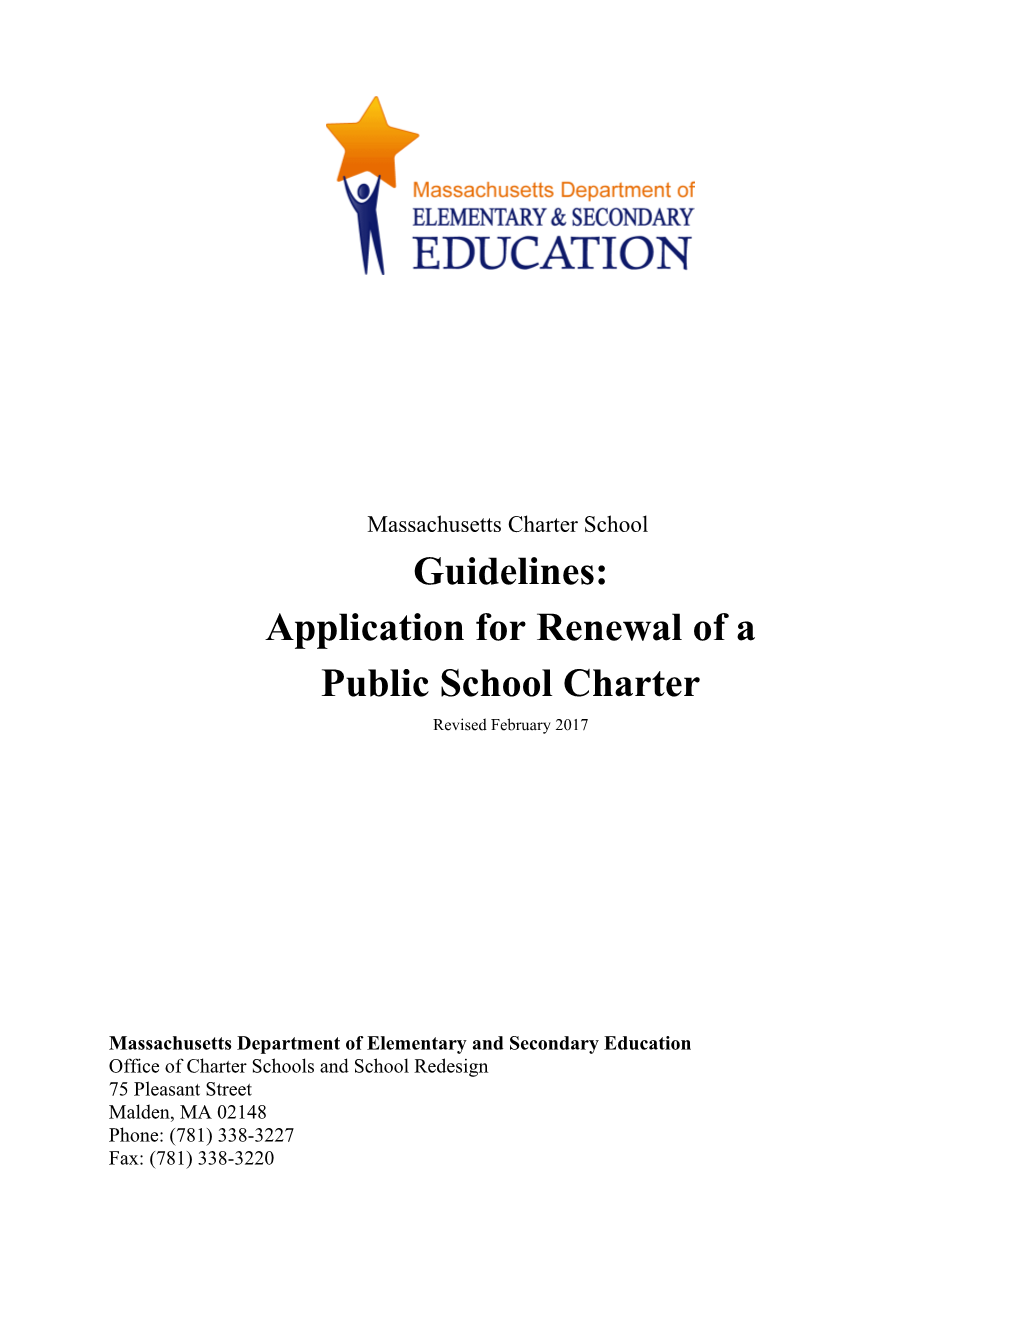 Guidelines for an Application for Renewal of a Public School Charter 2017